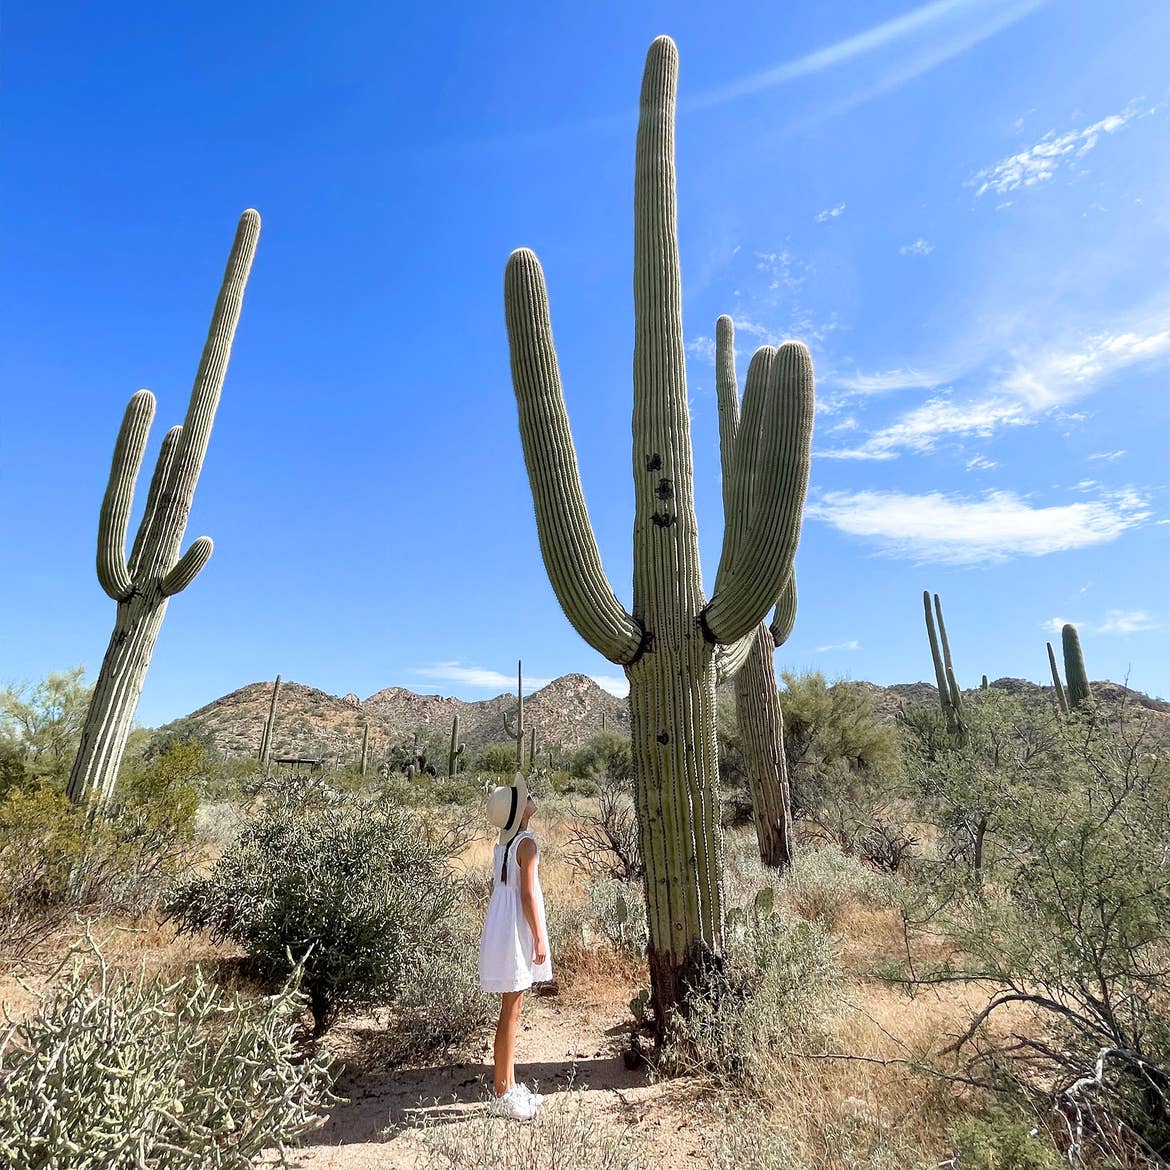 A young girl in a white dress, straw hat and sunglasses looks up at a tall cactus under a cloudy blue sky.